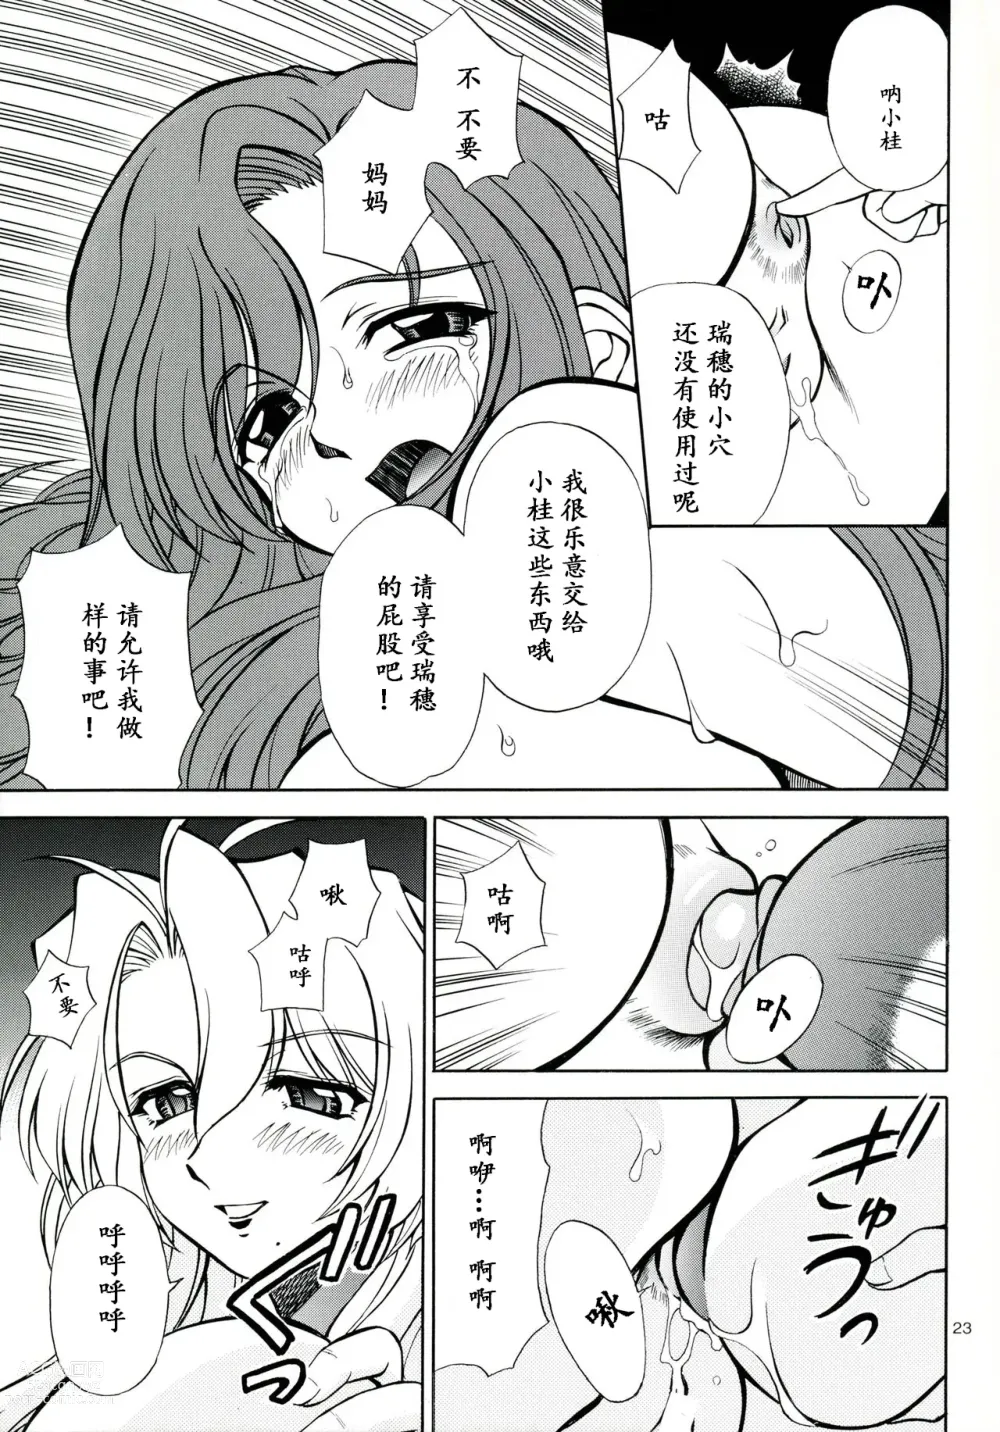 Page 22 of doujinshi Mother -Re Edition-